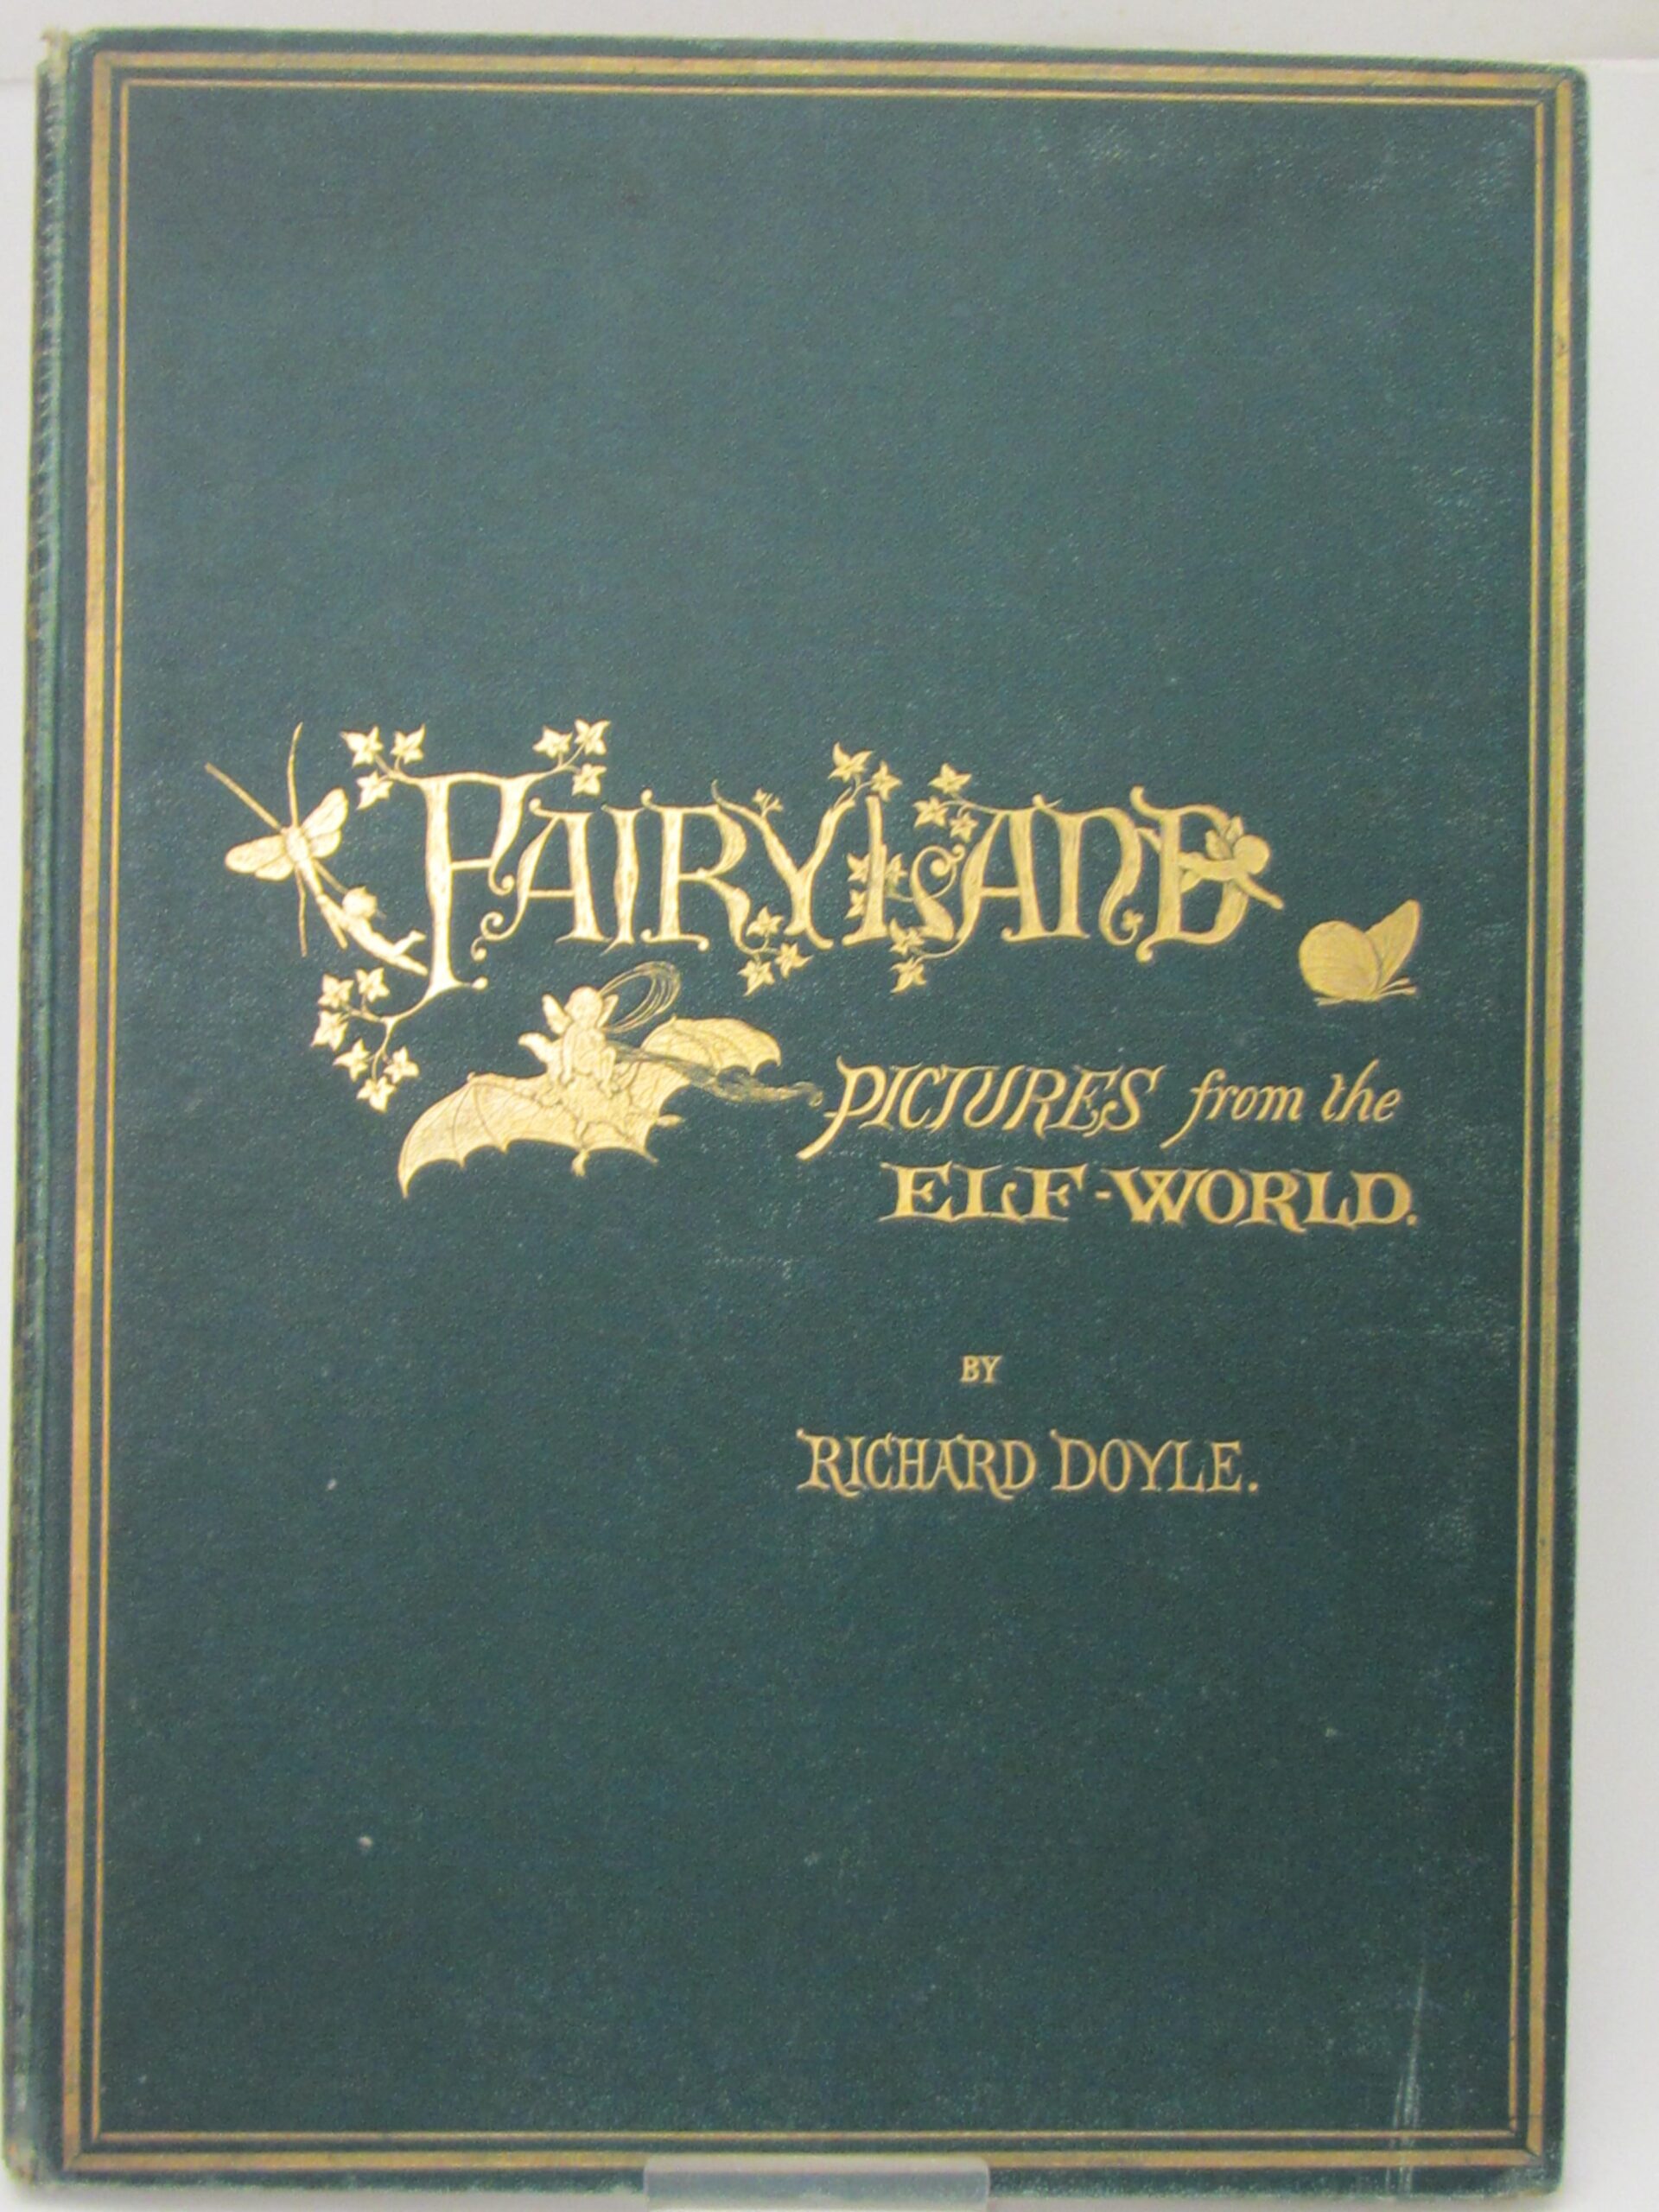 In Fairyland. A Series Of Pictures From The Elf-World (1875) by William Allingham & Richard Doyle